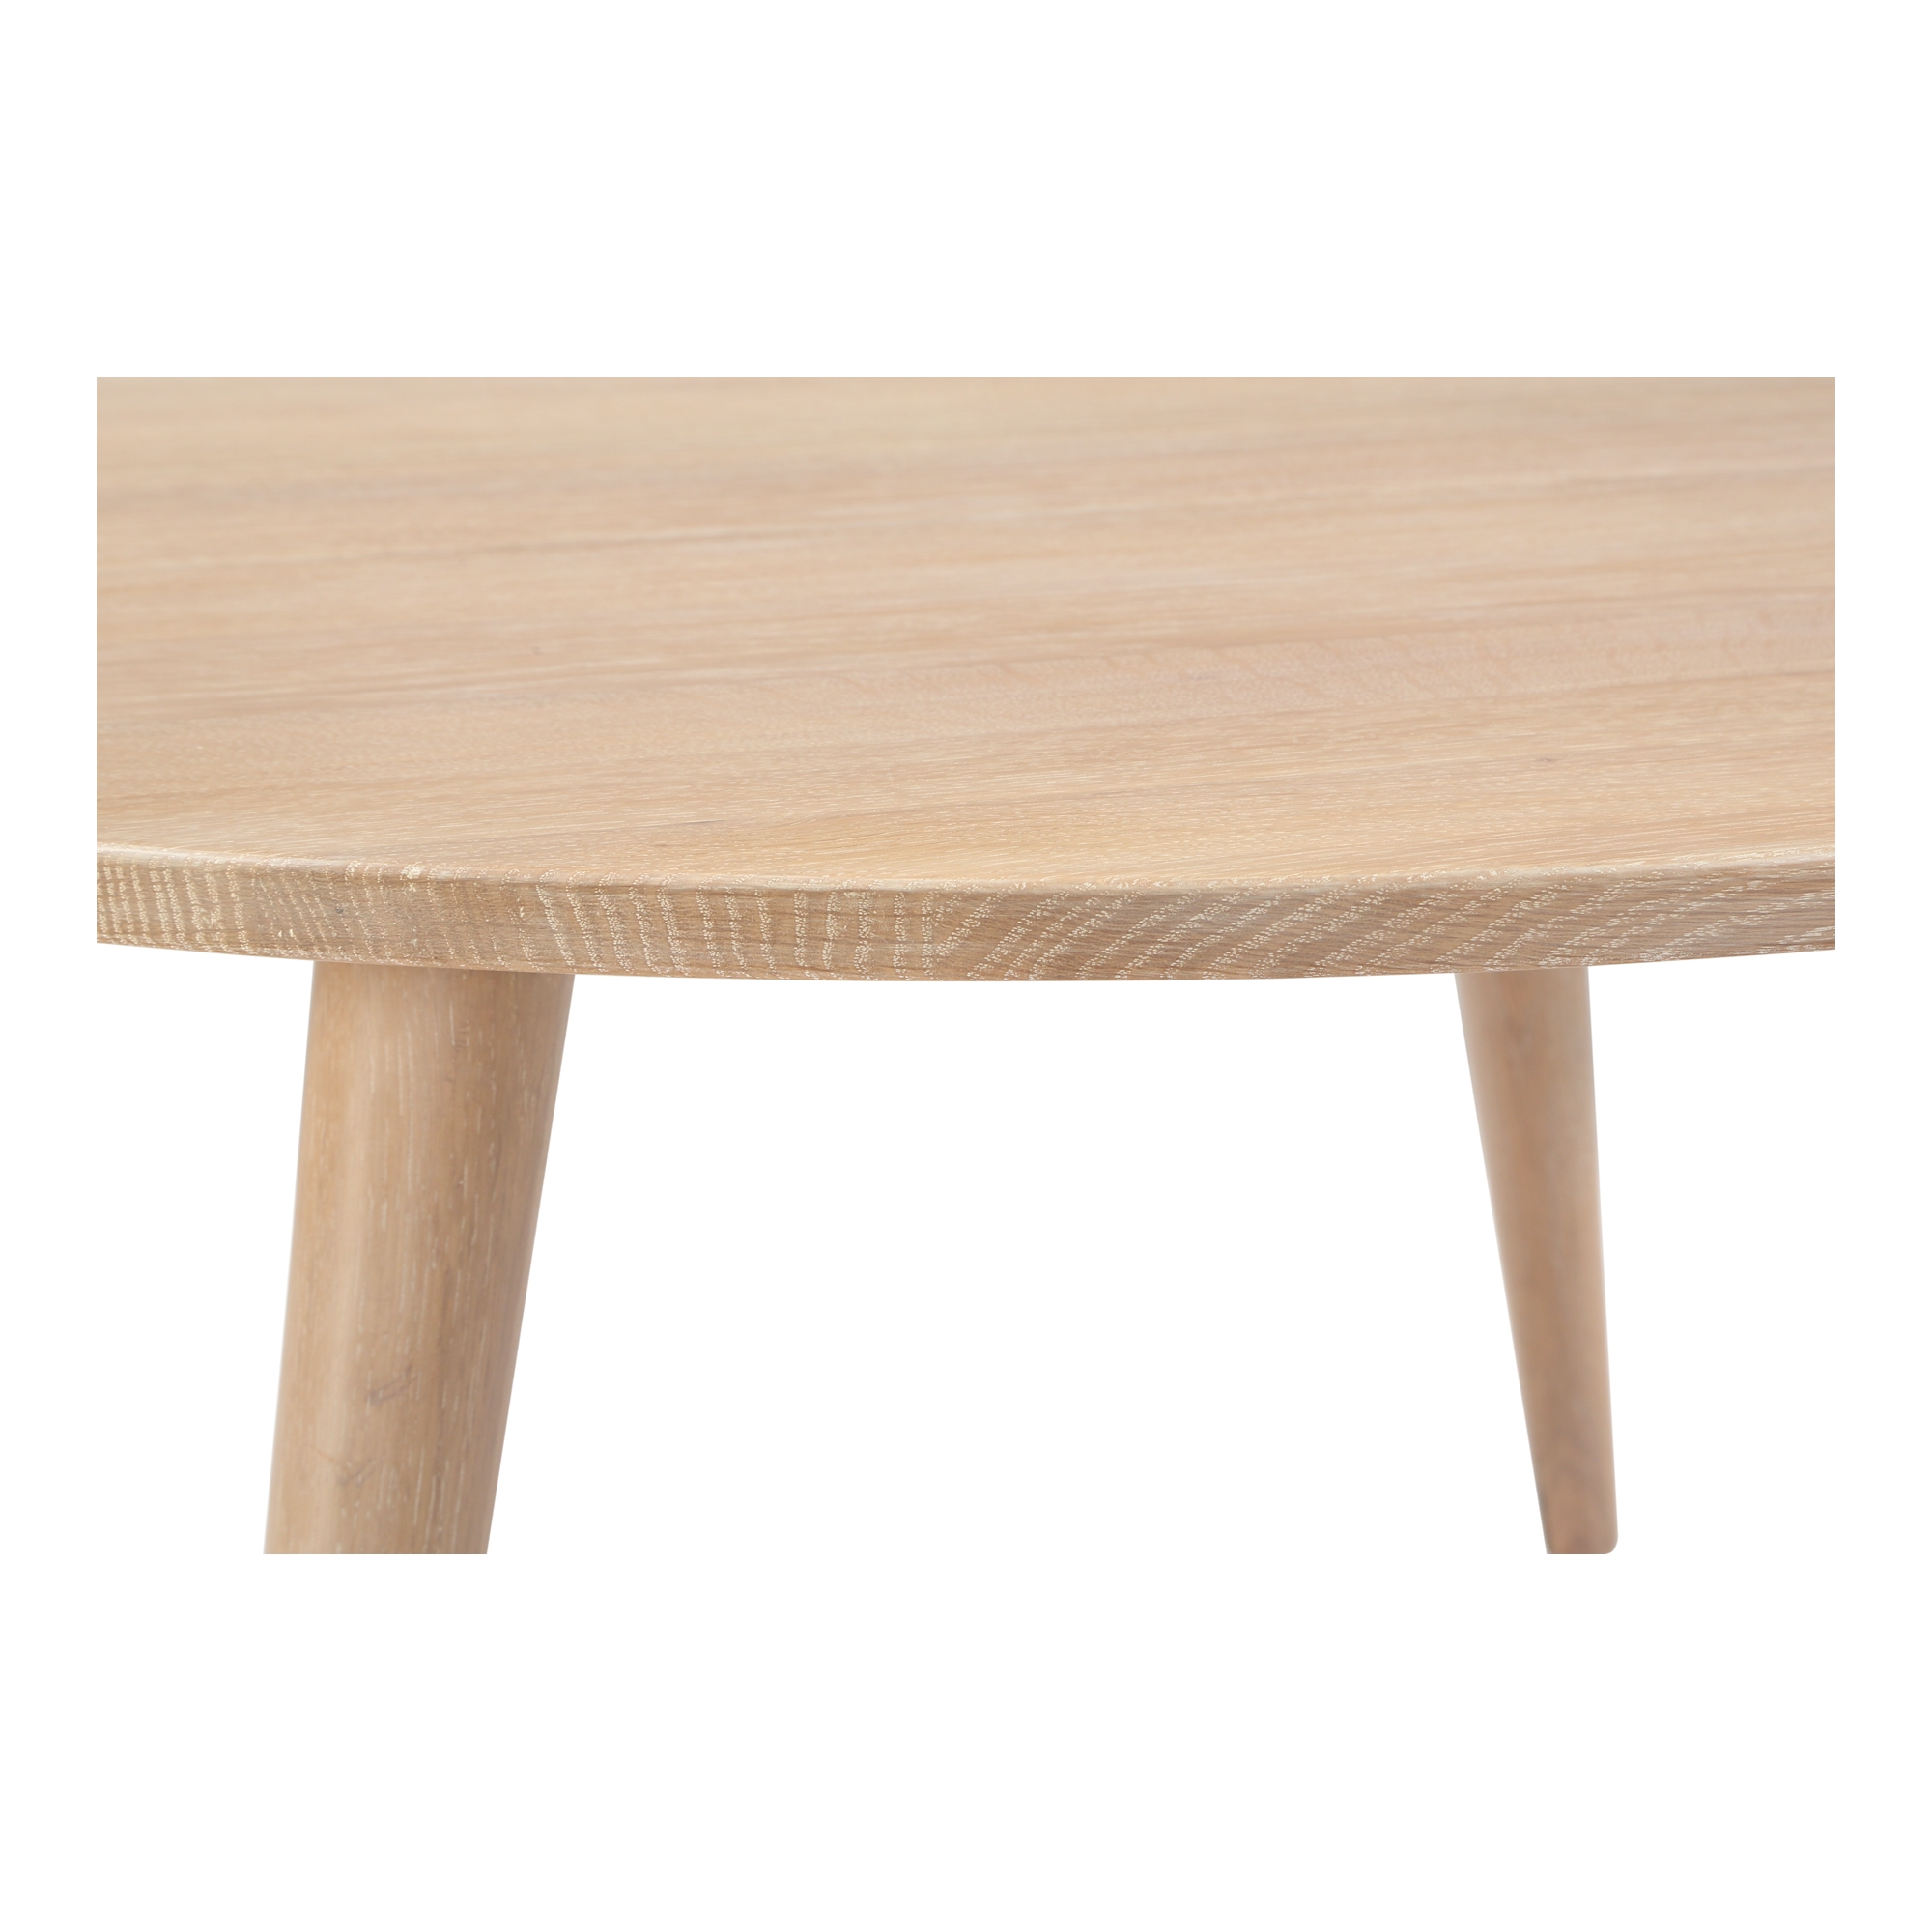 ARIANO COFFEE TABLE - Image 2